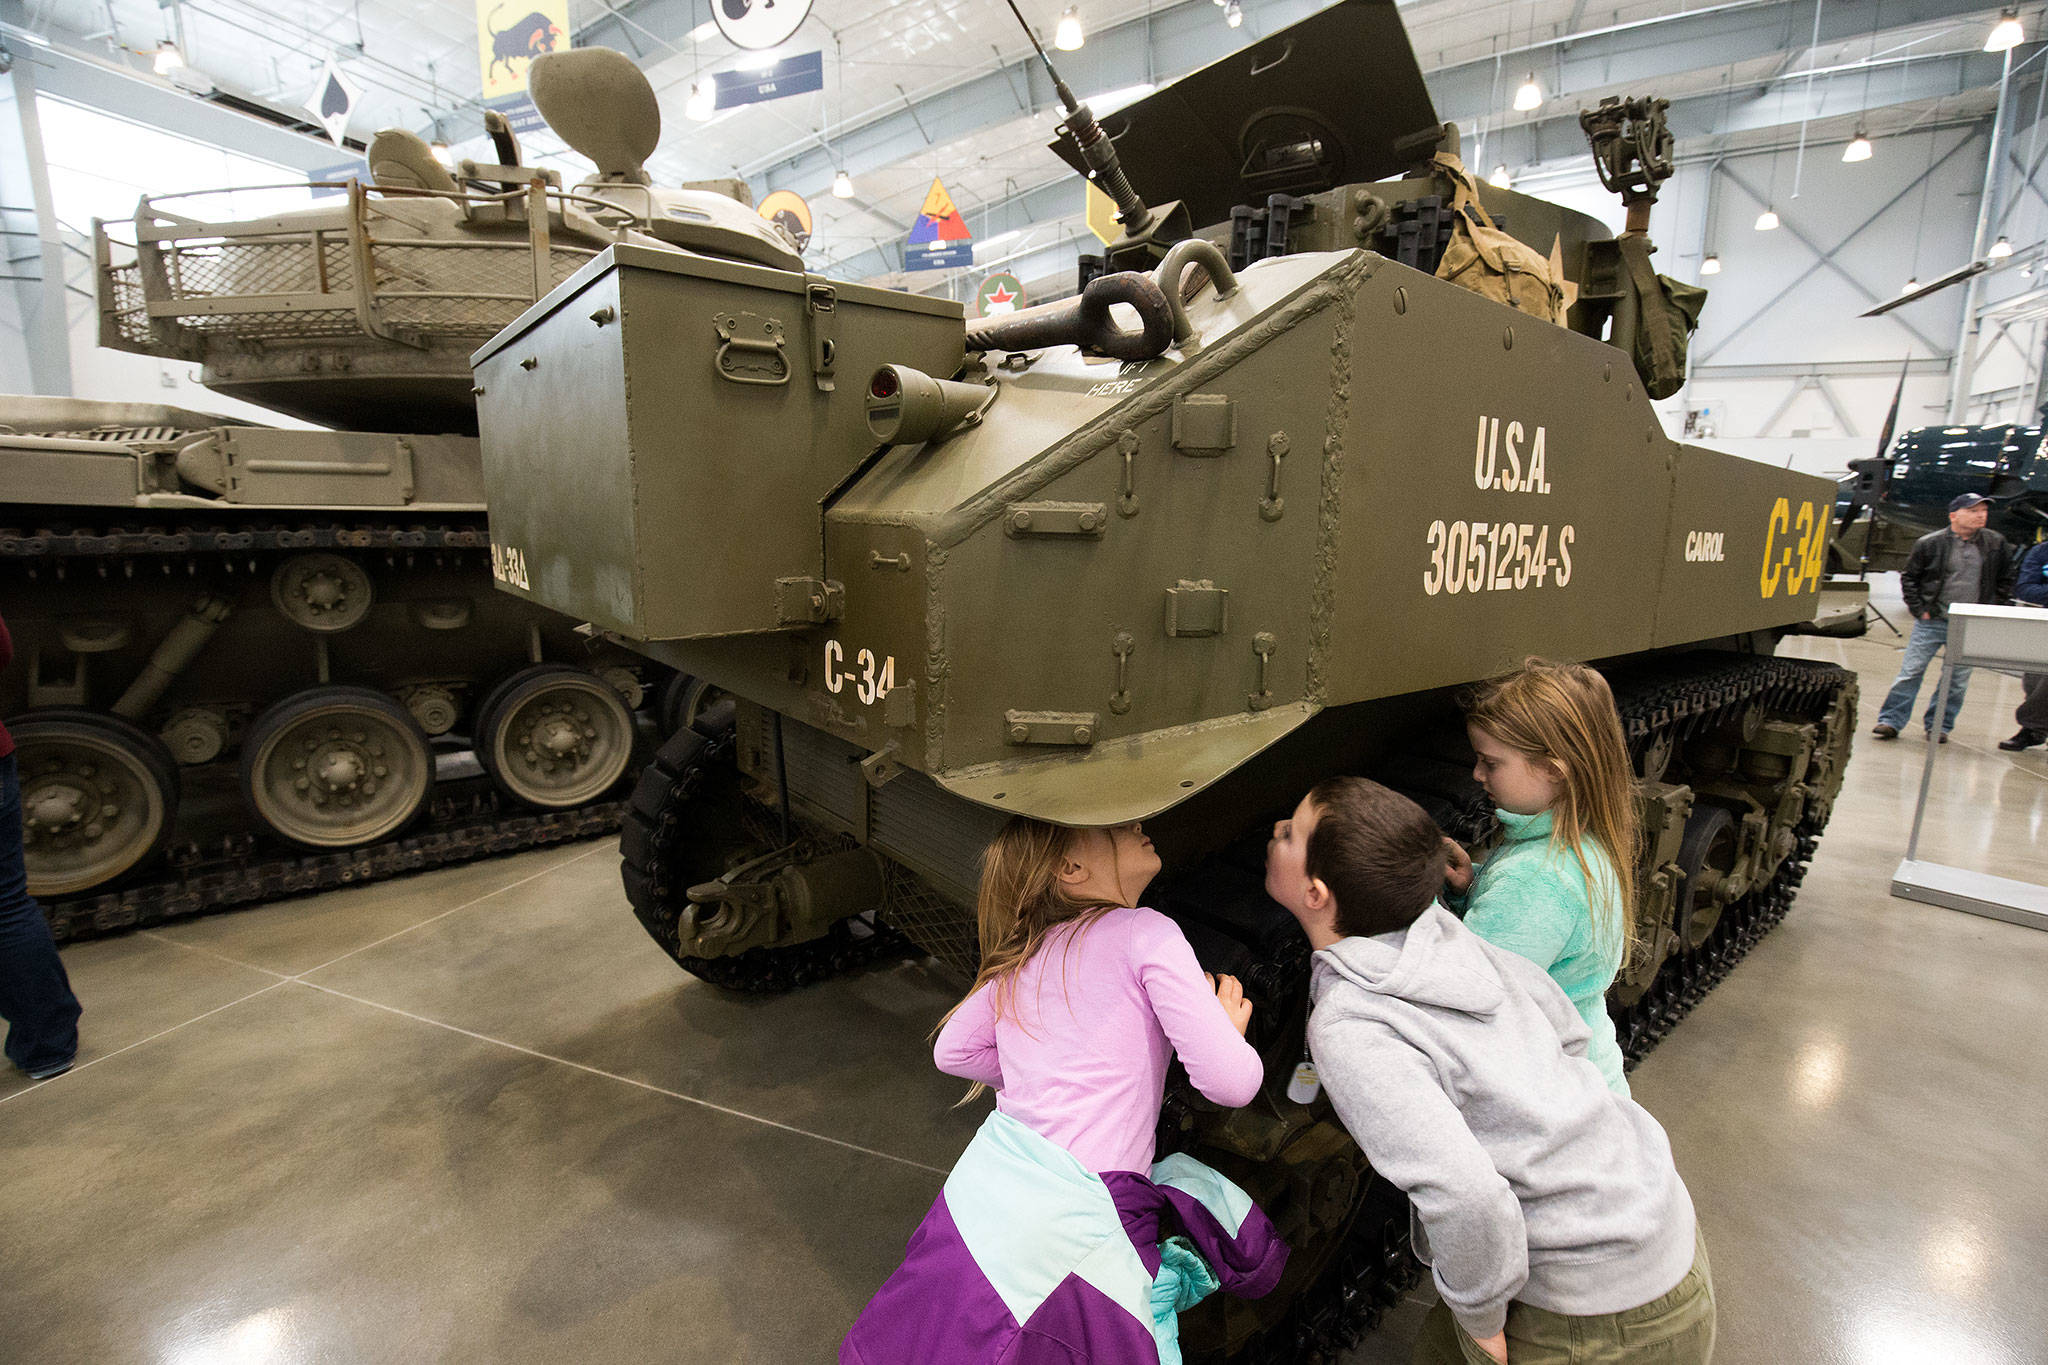 Flying Heritage and Combat Armor Museum will close — for now